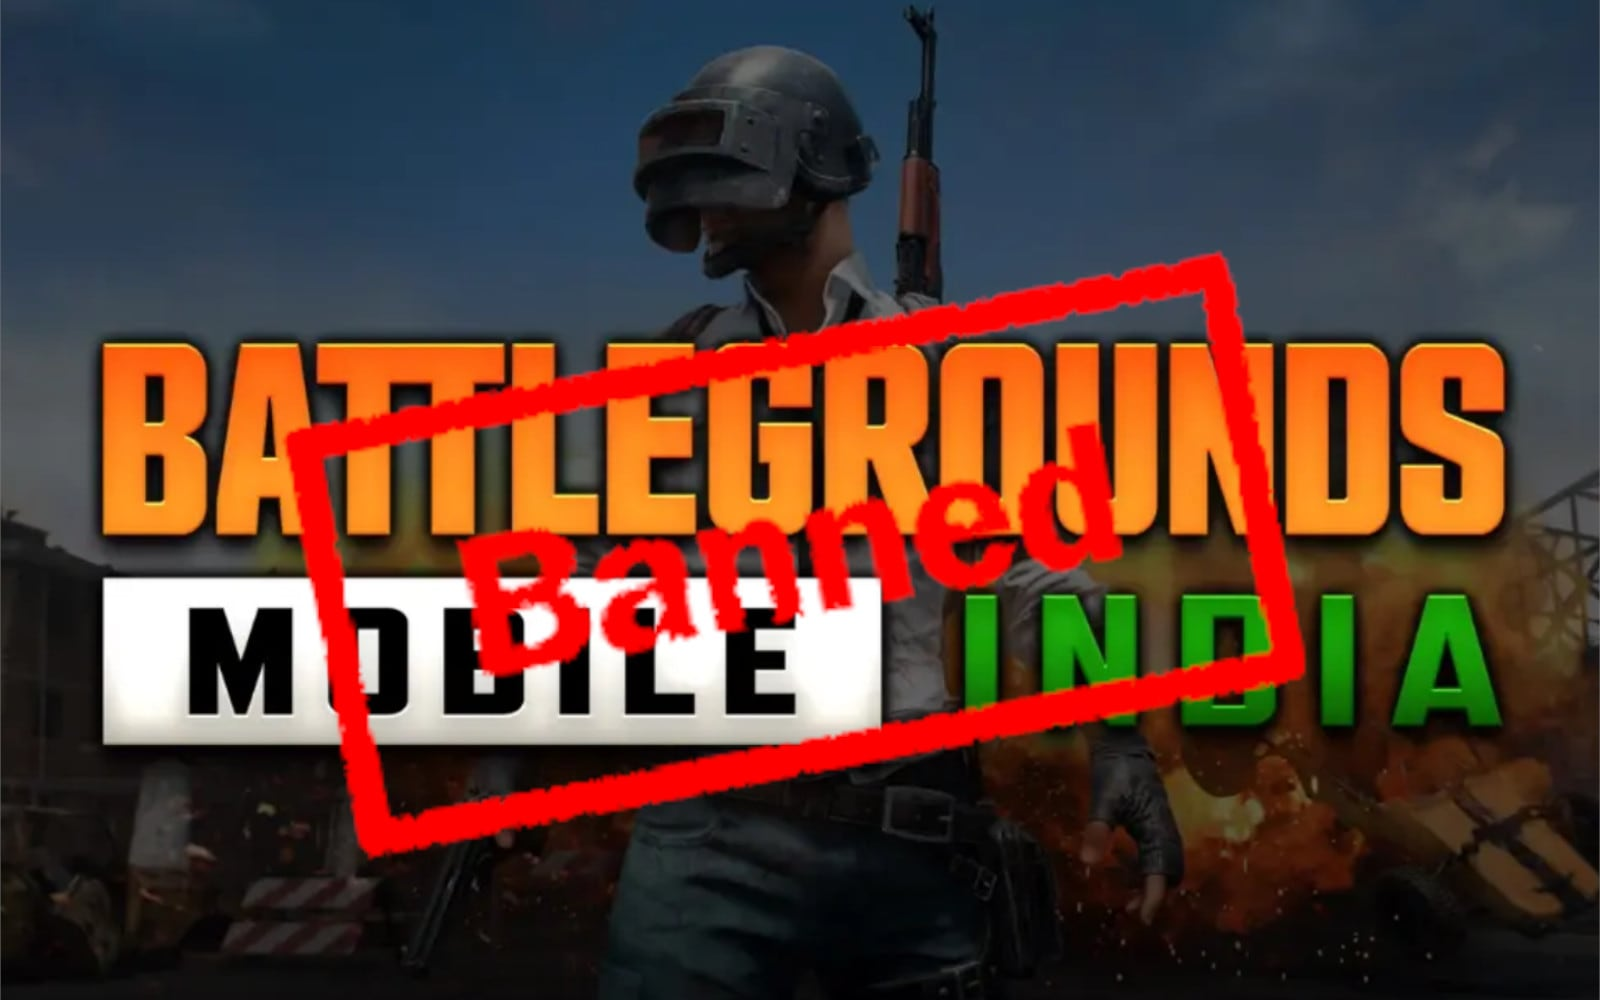 The e-sports industry is hindered by uncertainty about the BGMI ban. The talk that BGMI might be banned in India is bad news for players, tournament organizers